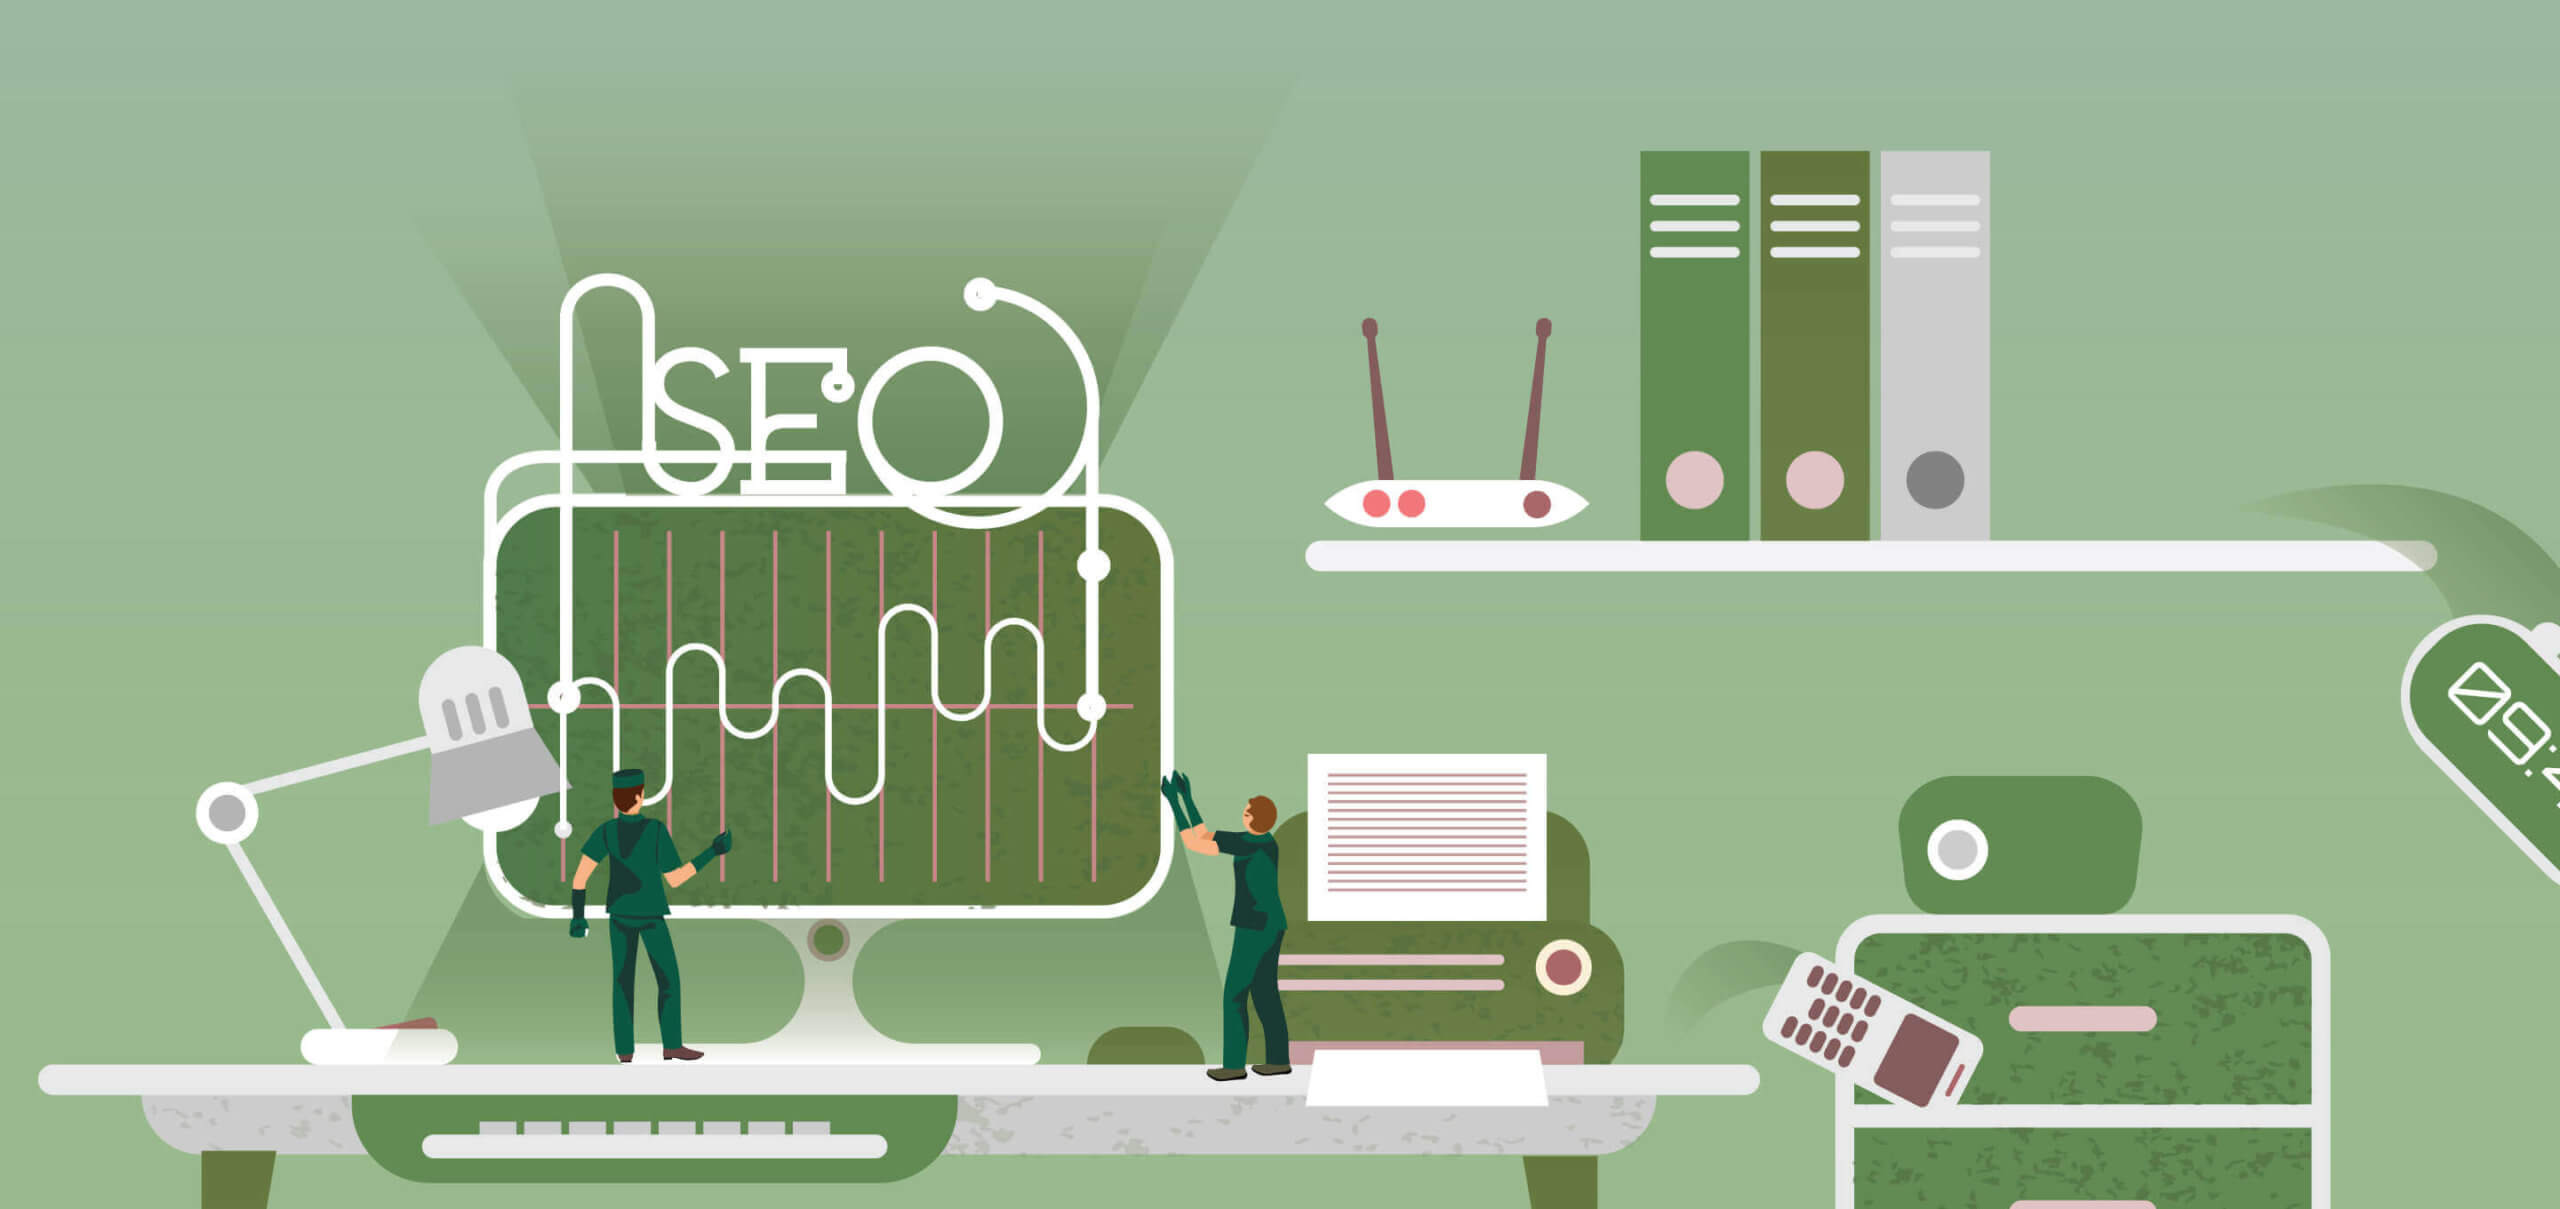 Electrician and search engine optimization services